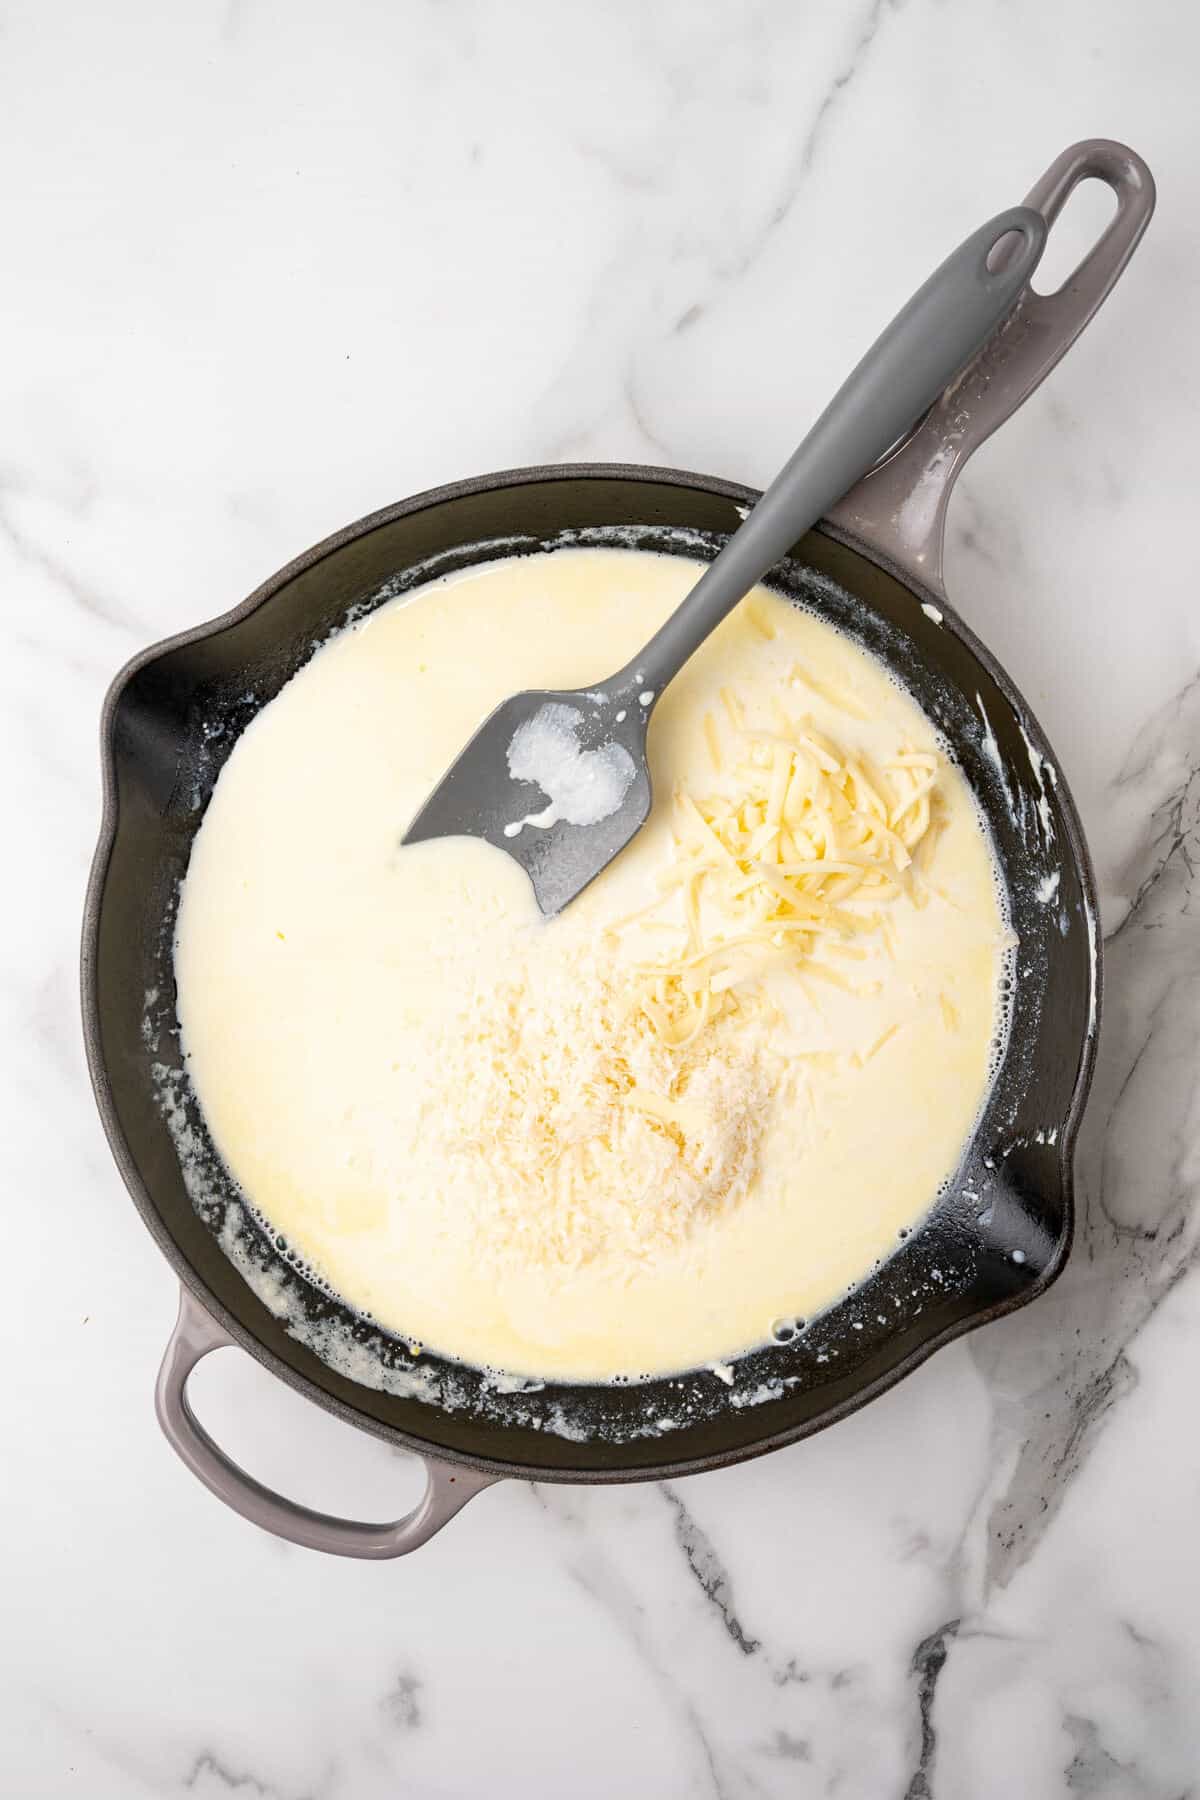 A skillet containing a creamy sauce and cheese, alongside a spatula on a marble countertop.